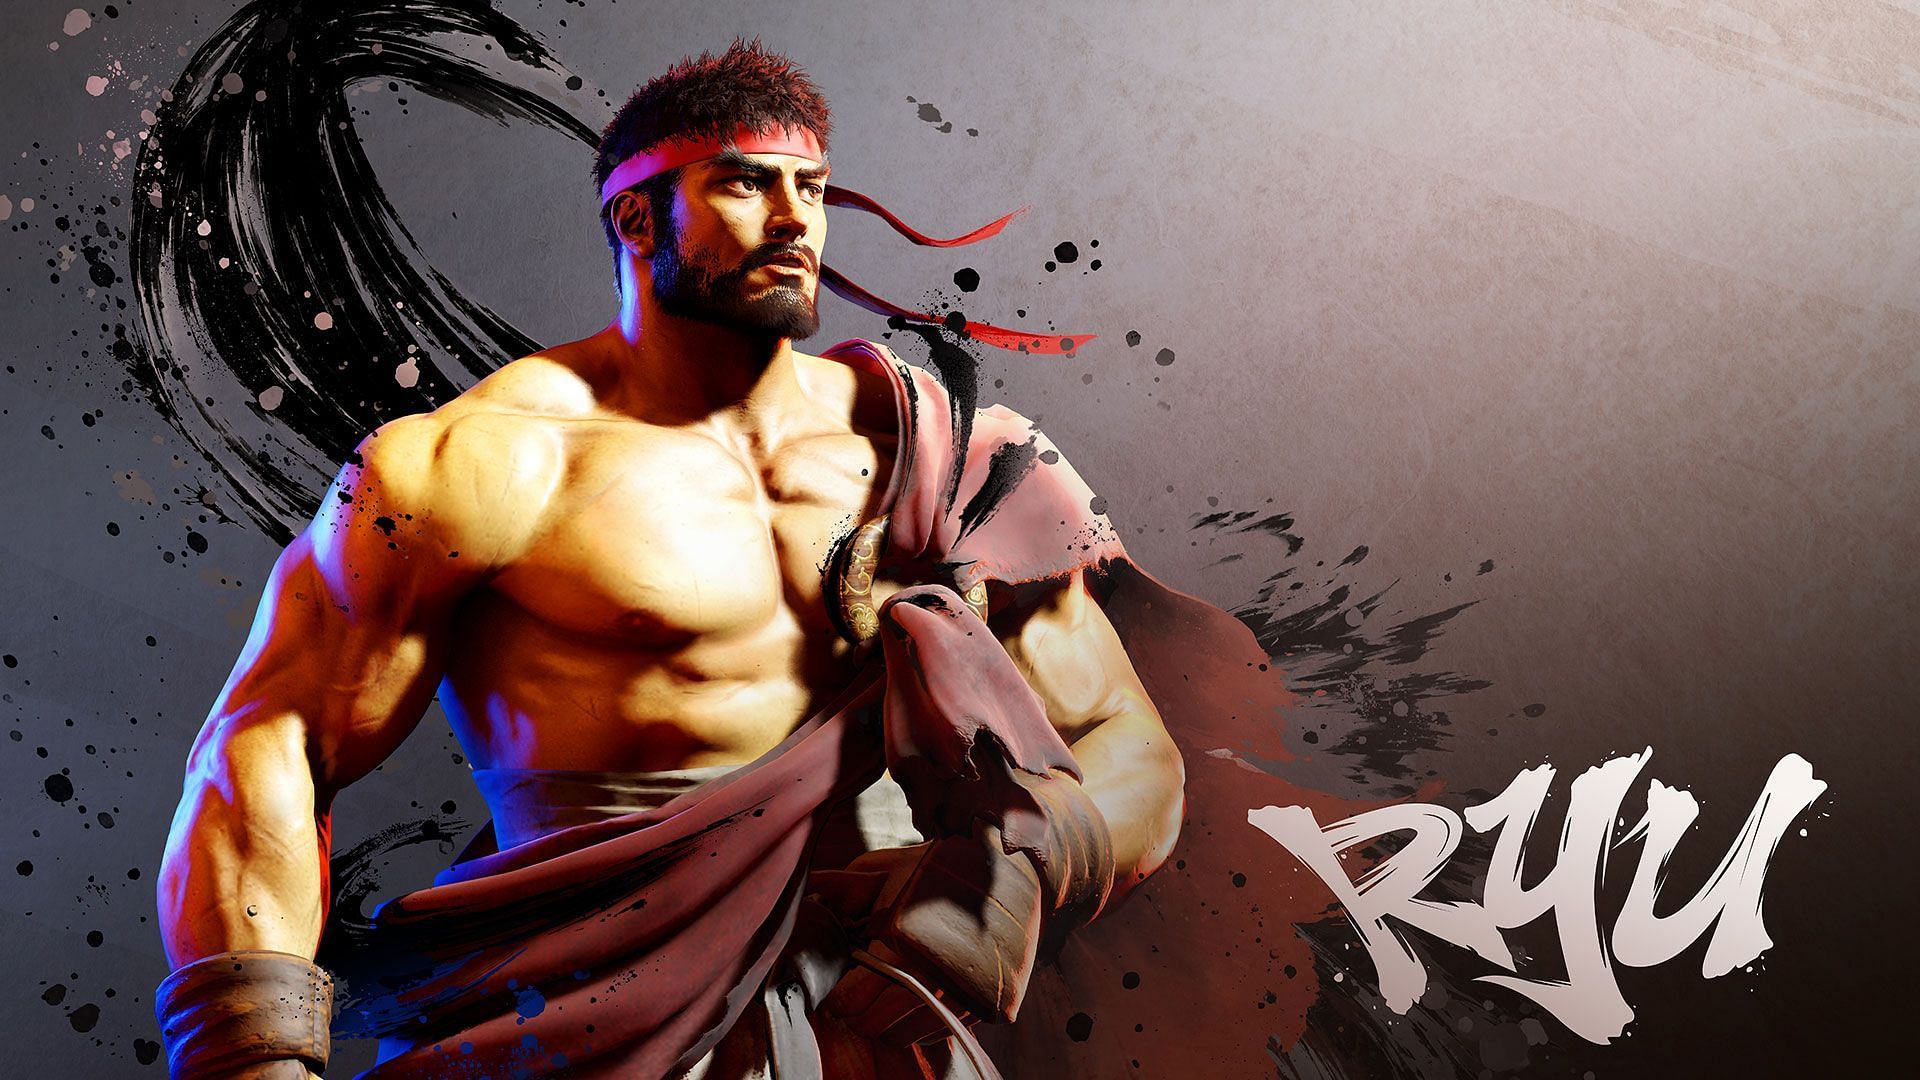 Ryu is the poster boy of the Street Fighter franchise (Image via Street Fighter)